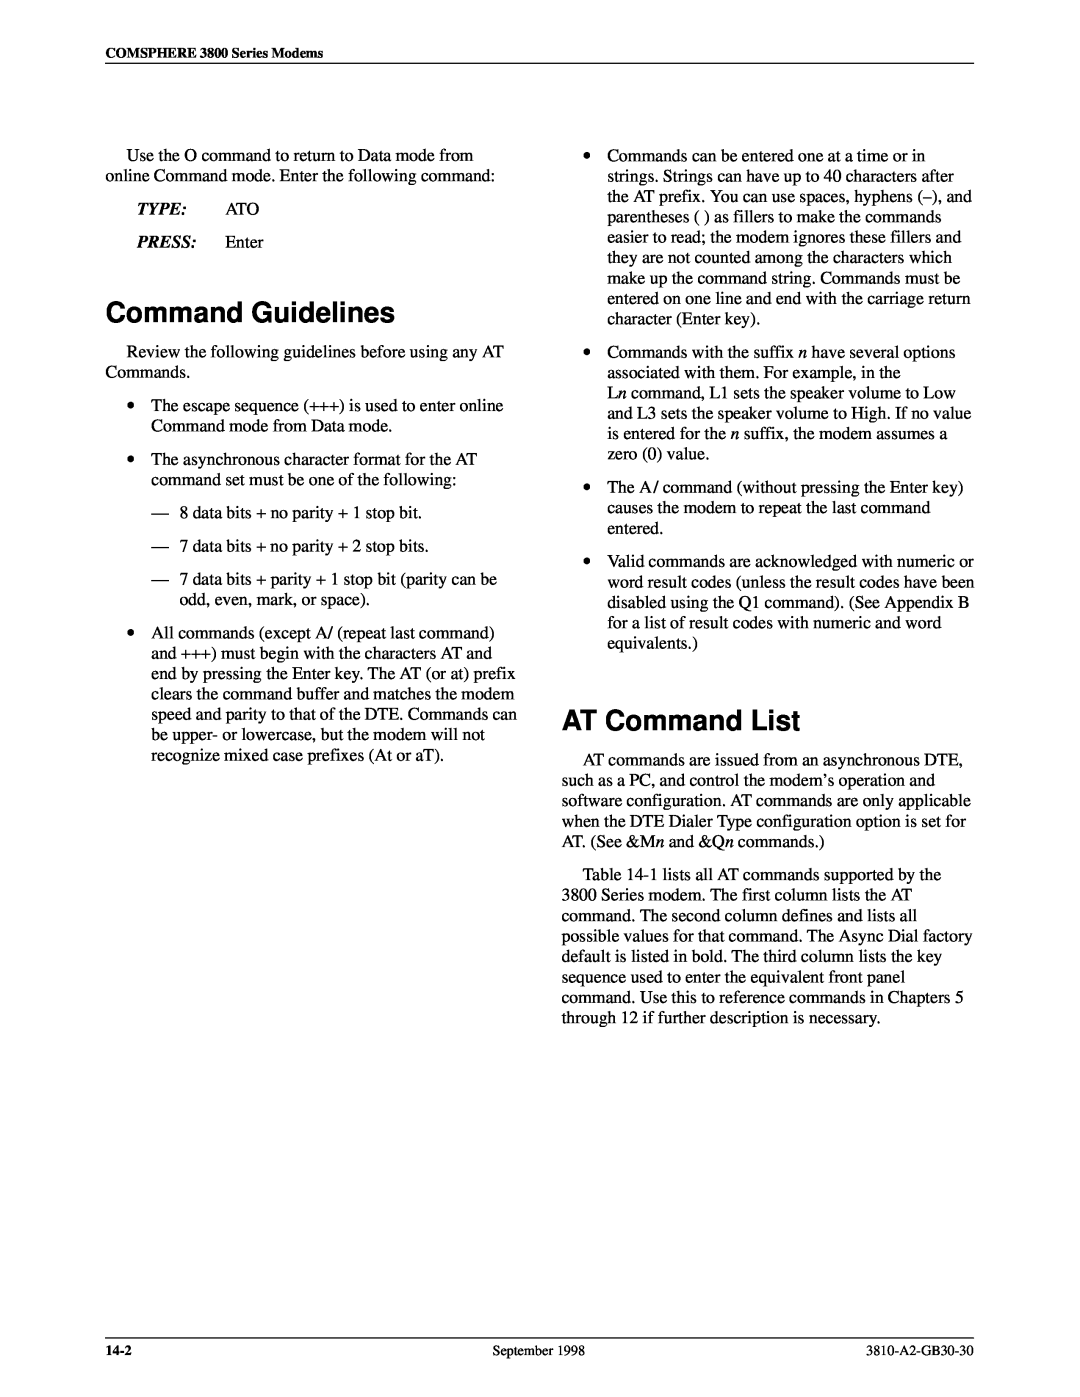 Paradyne 3800 manual Command Guidelines, AT Command List, TYPE ATO PRESS Enter 